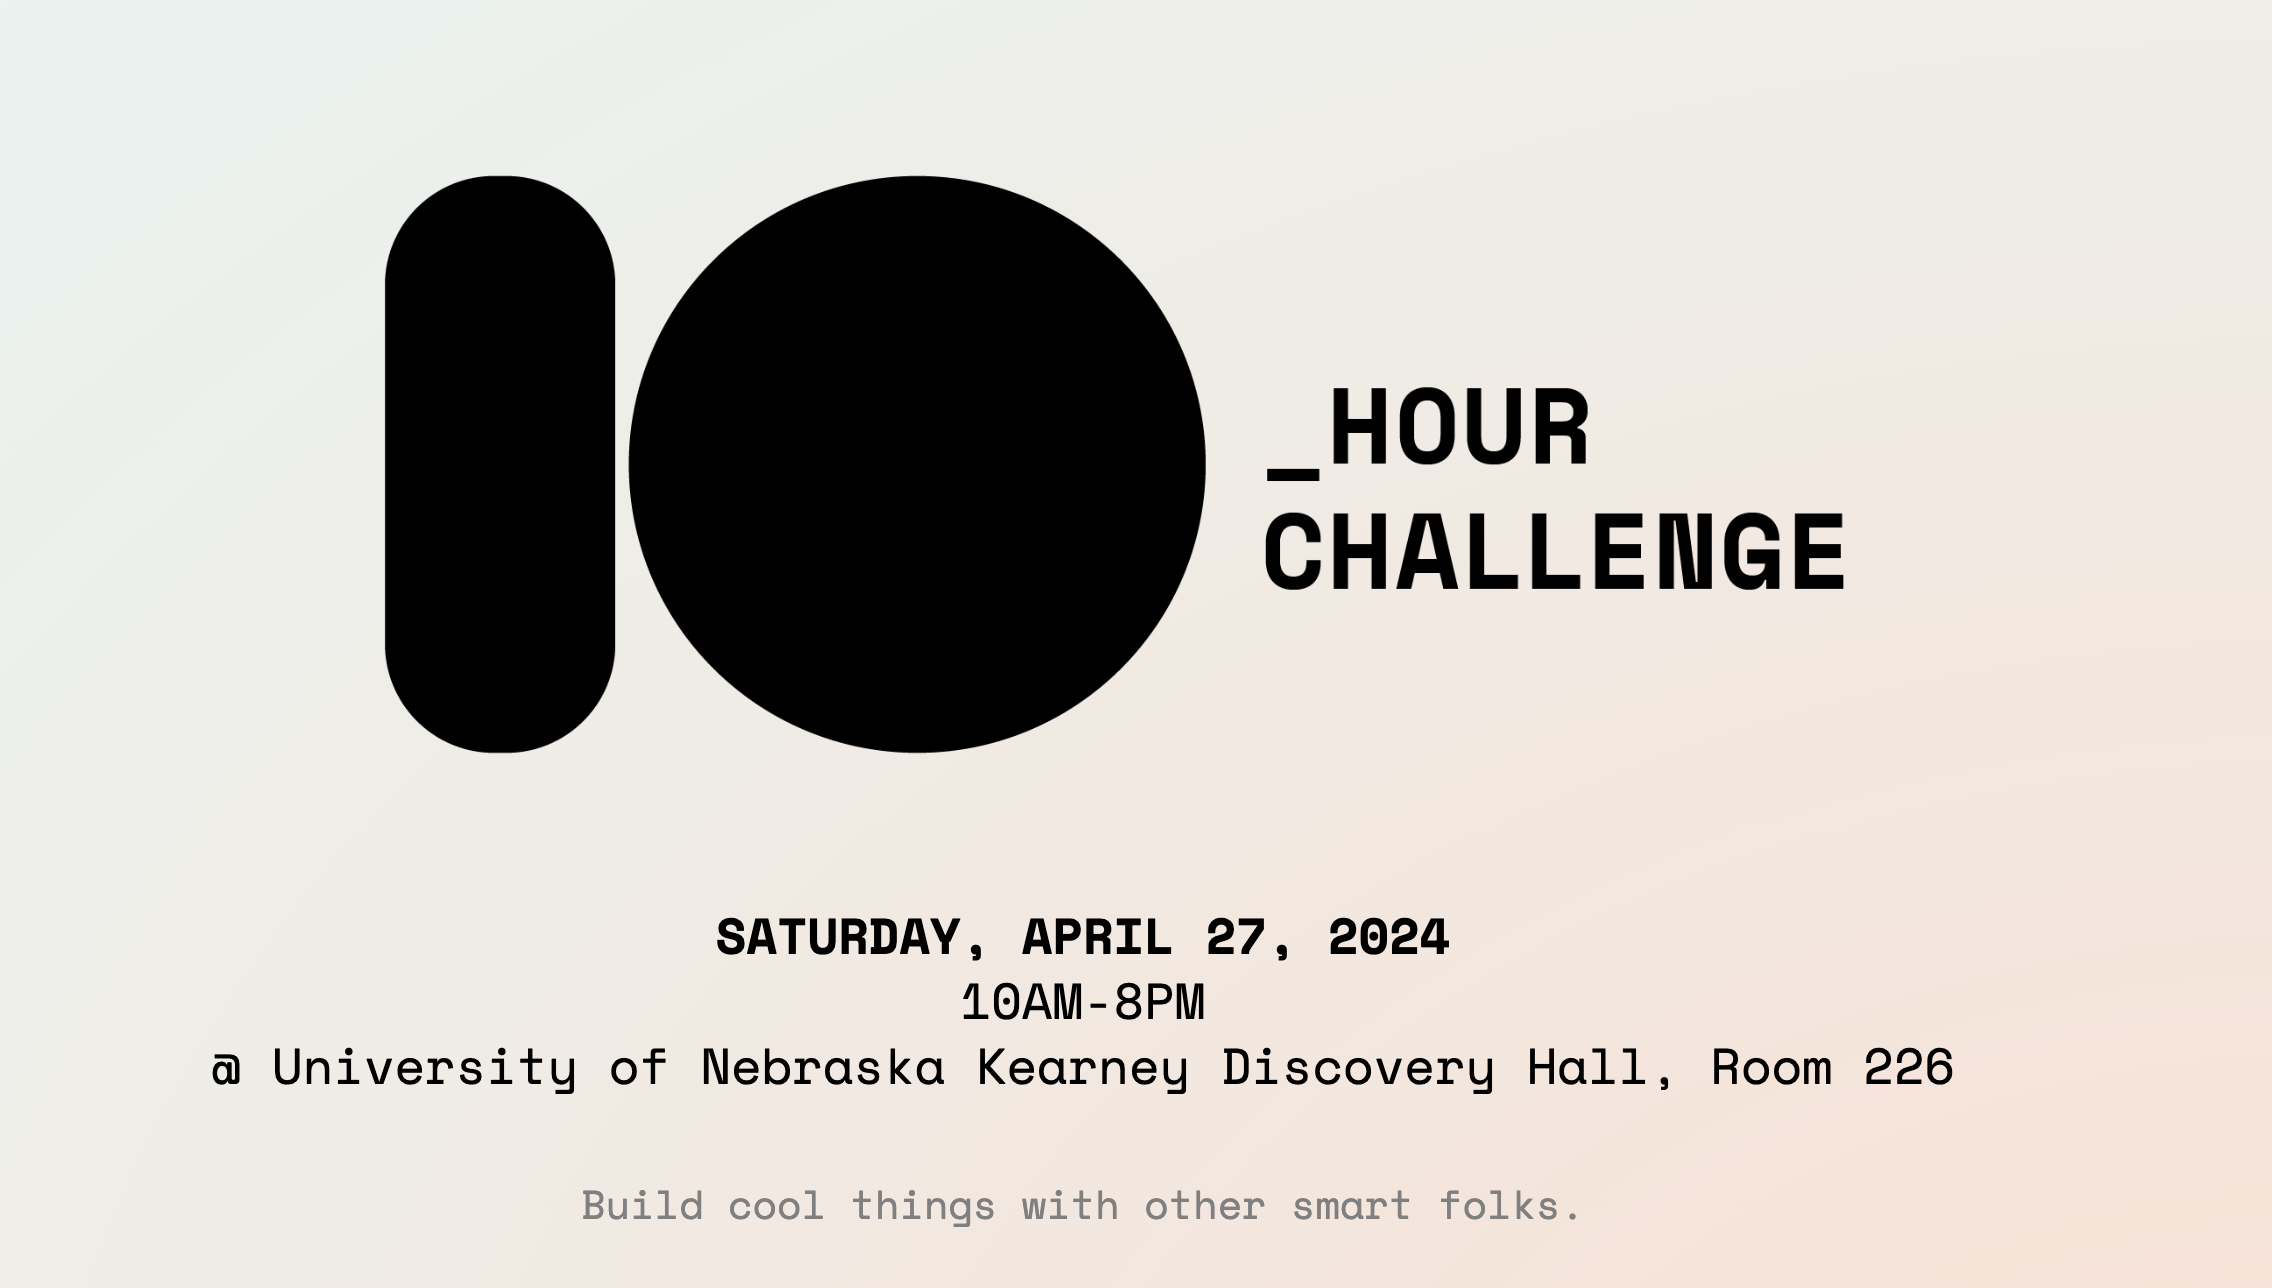 Join the 10 Hour Challenge in Kearney on April 27